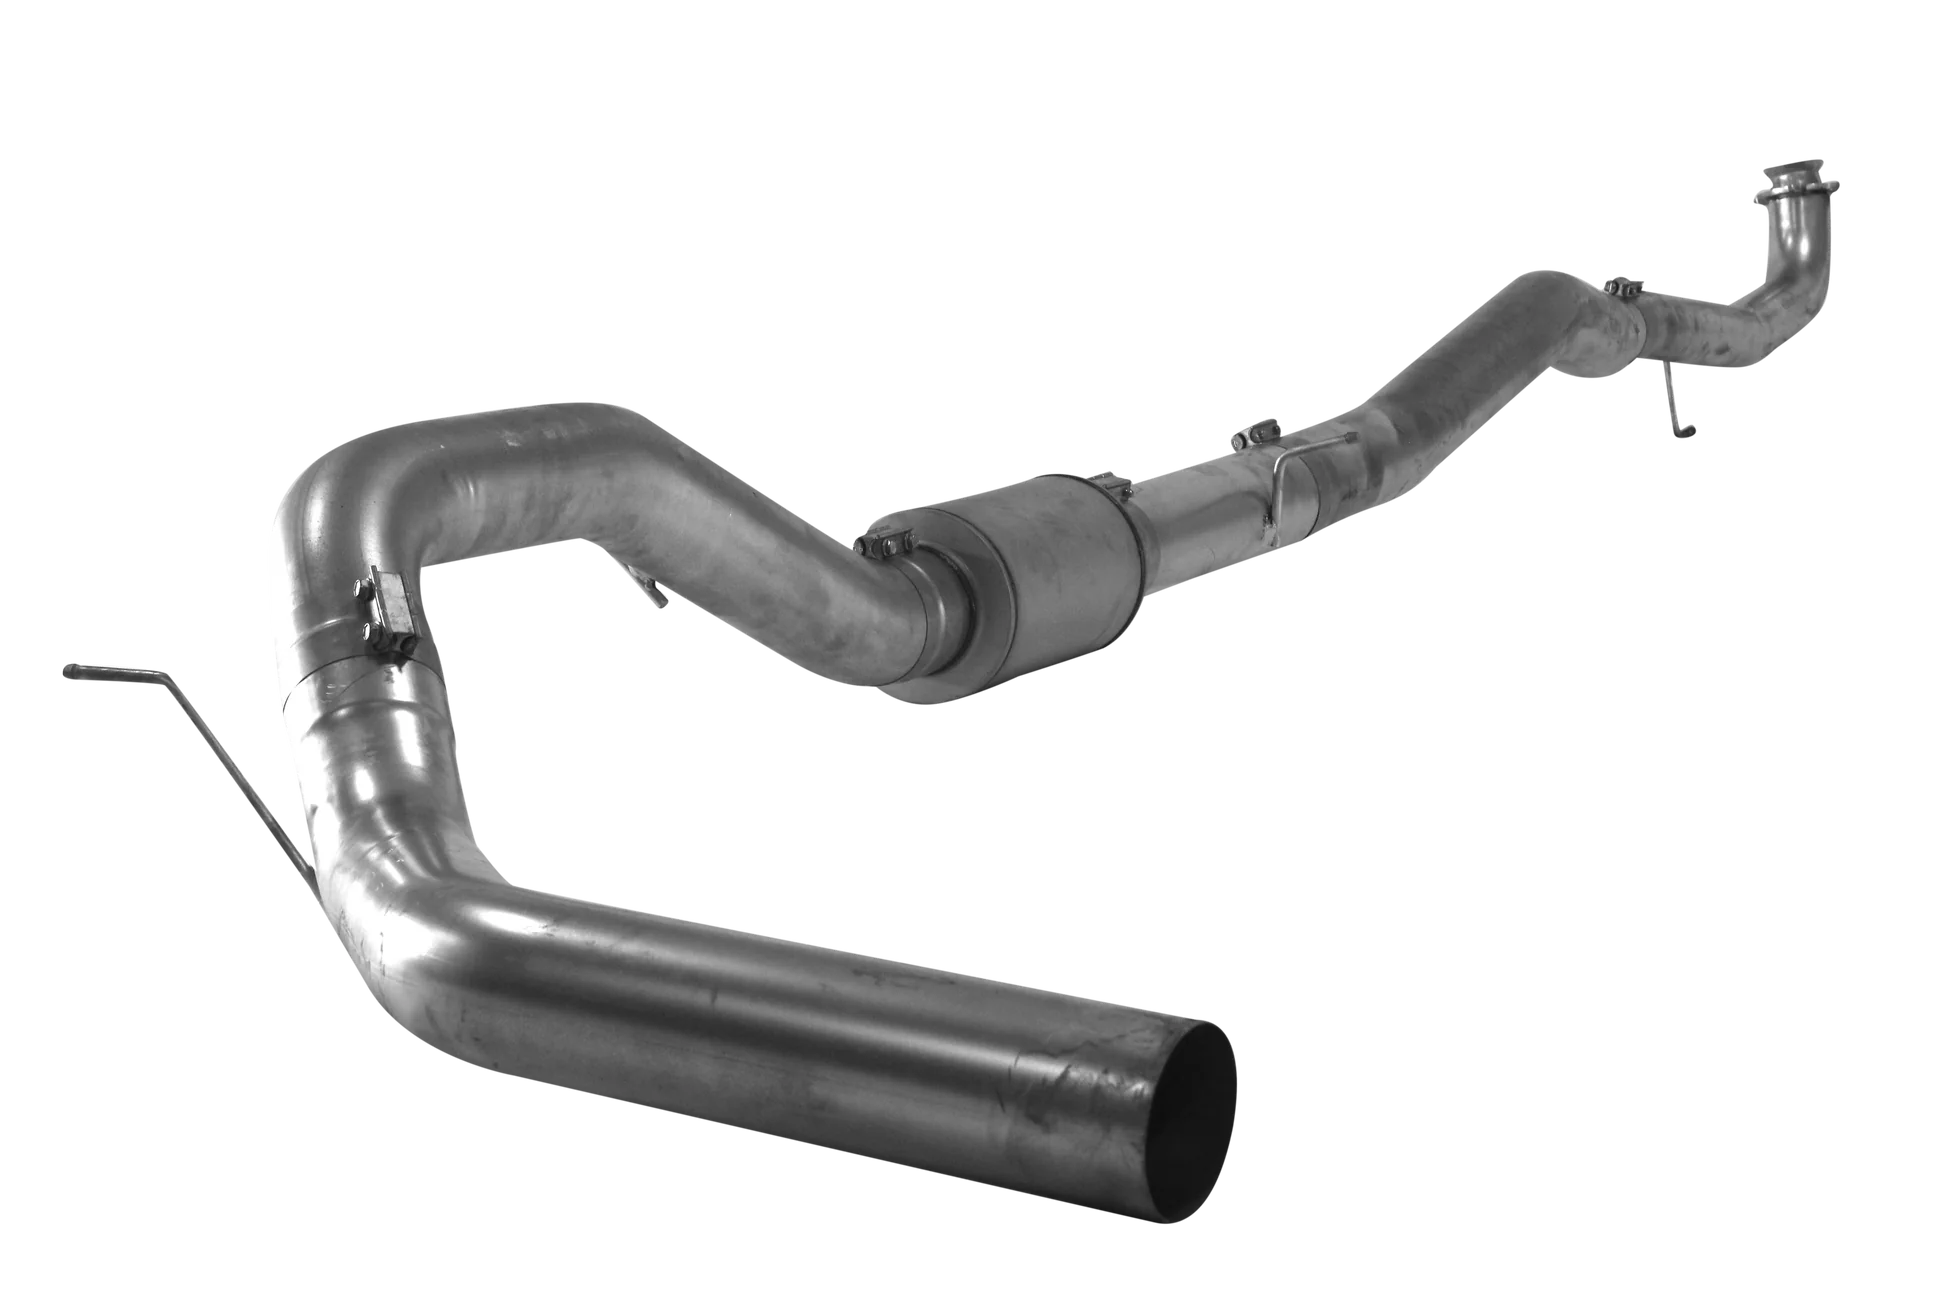 531016 531017 532016 532017 Mel's Manufacturing 5" Downpipe Back Single | 2020-2023 GM 2500/3500 6.6L DURAMAX L5P  Mels Mfg FloPro Flo-Pro Flo Pro Hell On Wheels Performance Ltd Limited Canadian Owned and Operated Online Diesel Parts Distribution & Wholesale Supply Center in Alberta Canada Shipping Supplying to Alberta British Columbia Sask Saskatchewan Manitoba Ontario Quebec Newfoundland Labrador New Brunswick Nova Scotia Prince Edward Island AB BC SK MB ON QC PQ NS NB NFLD N.L. PEI